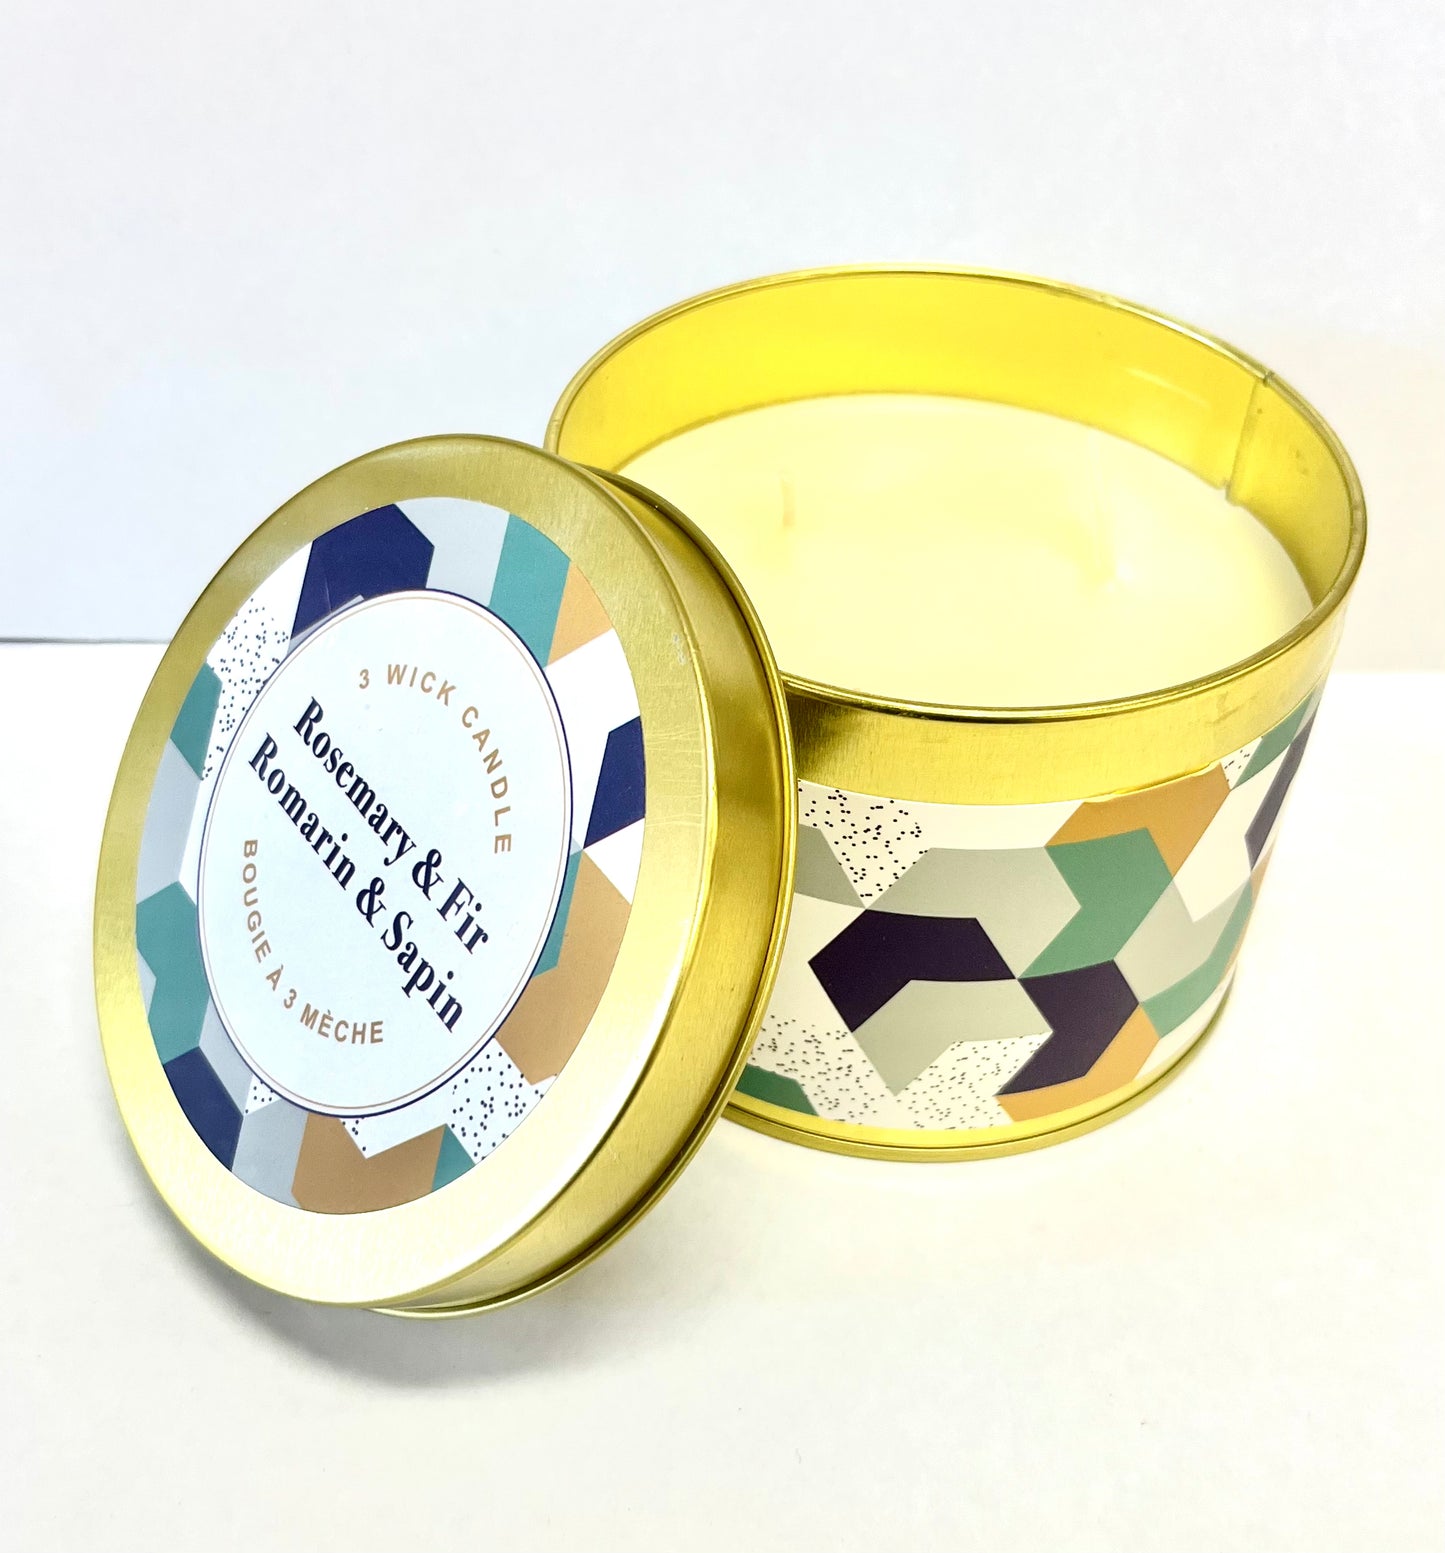 3 Wick Soy Blend 14oz Candle in Tin